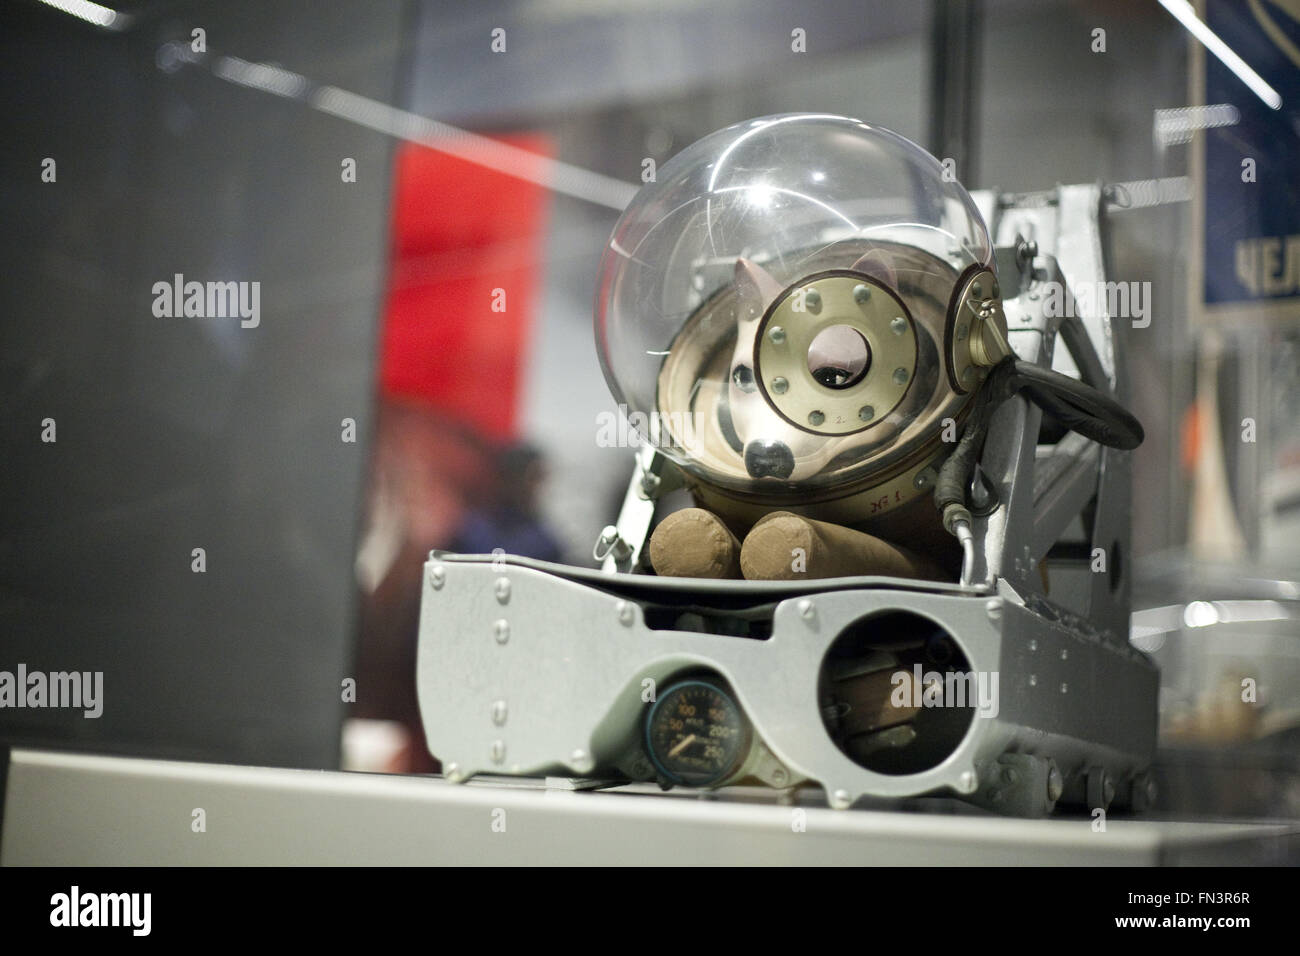 London, UK. 12th Mar, 2016. Cosmonauts: Birth of the Space Age.DOG EJECTOR SEAT AND SUIT USED ON SUBORBITAL FLIGHTS, 1960.The Science Museum exhibit has assembled a most significant collection of Russian spacecraft and artefacts ever to be shown in the UK. In 1957 Russia launched the world's first artificial satellite, Sputnik, into space and just four years later sent the first ever human ''“ Yuri Gagarin. It was Russia that turned the dream of space travel into a reality and became the first nation to explore space. On display was Vostok 6: the capsule flown by Valentina Tereshkova, the Stock Photo